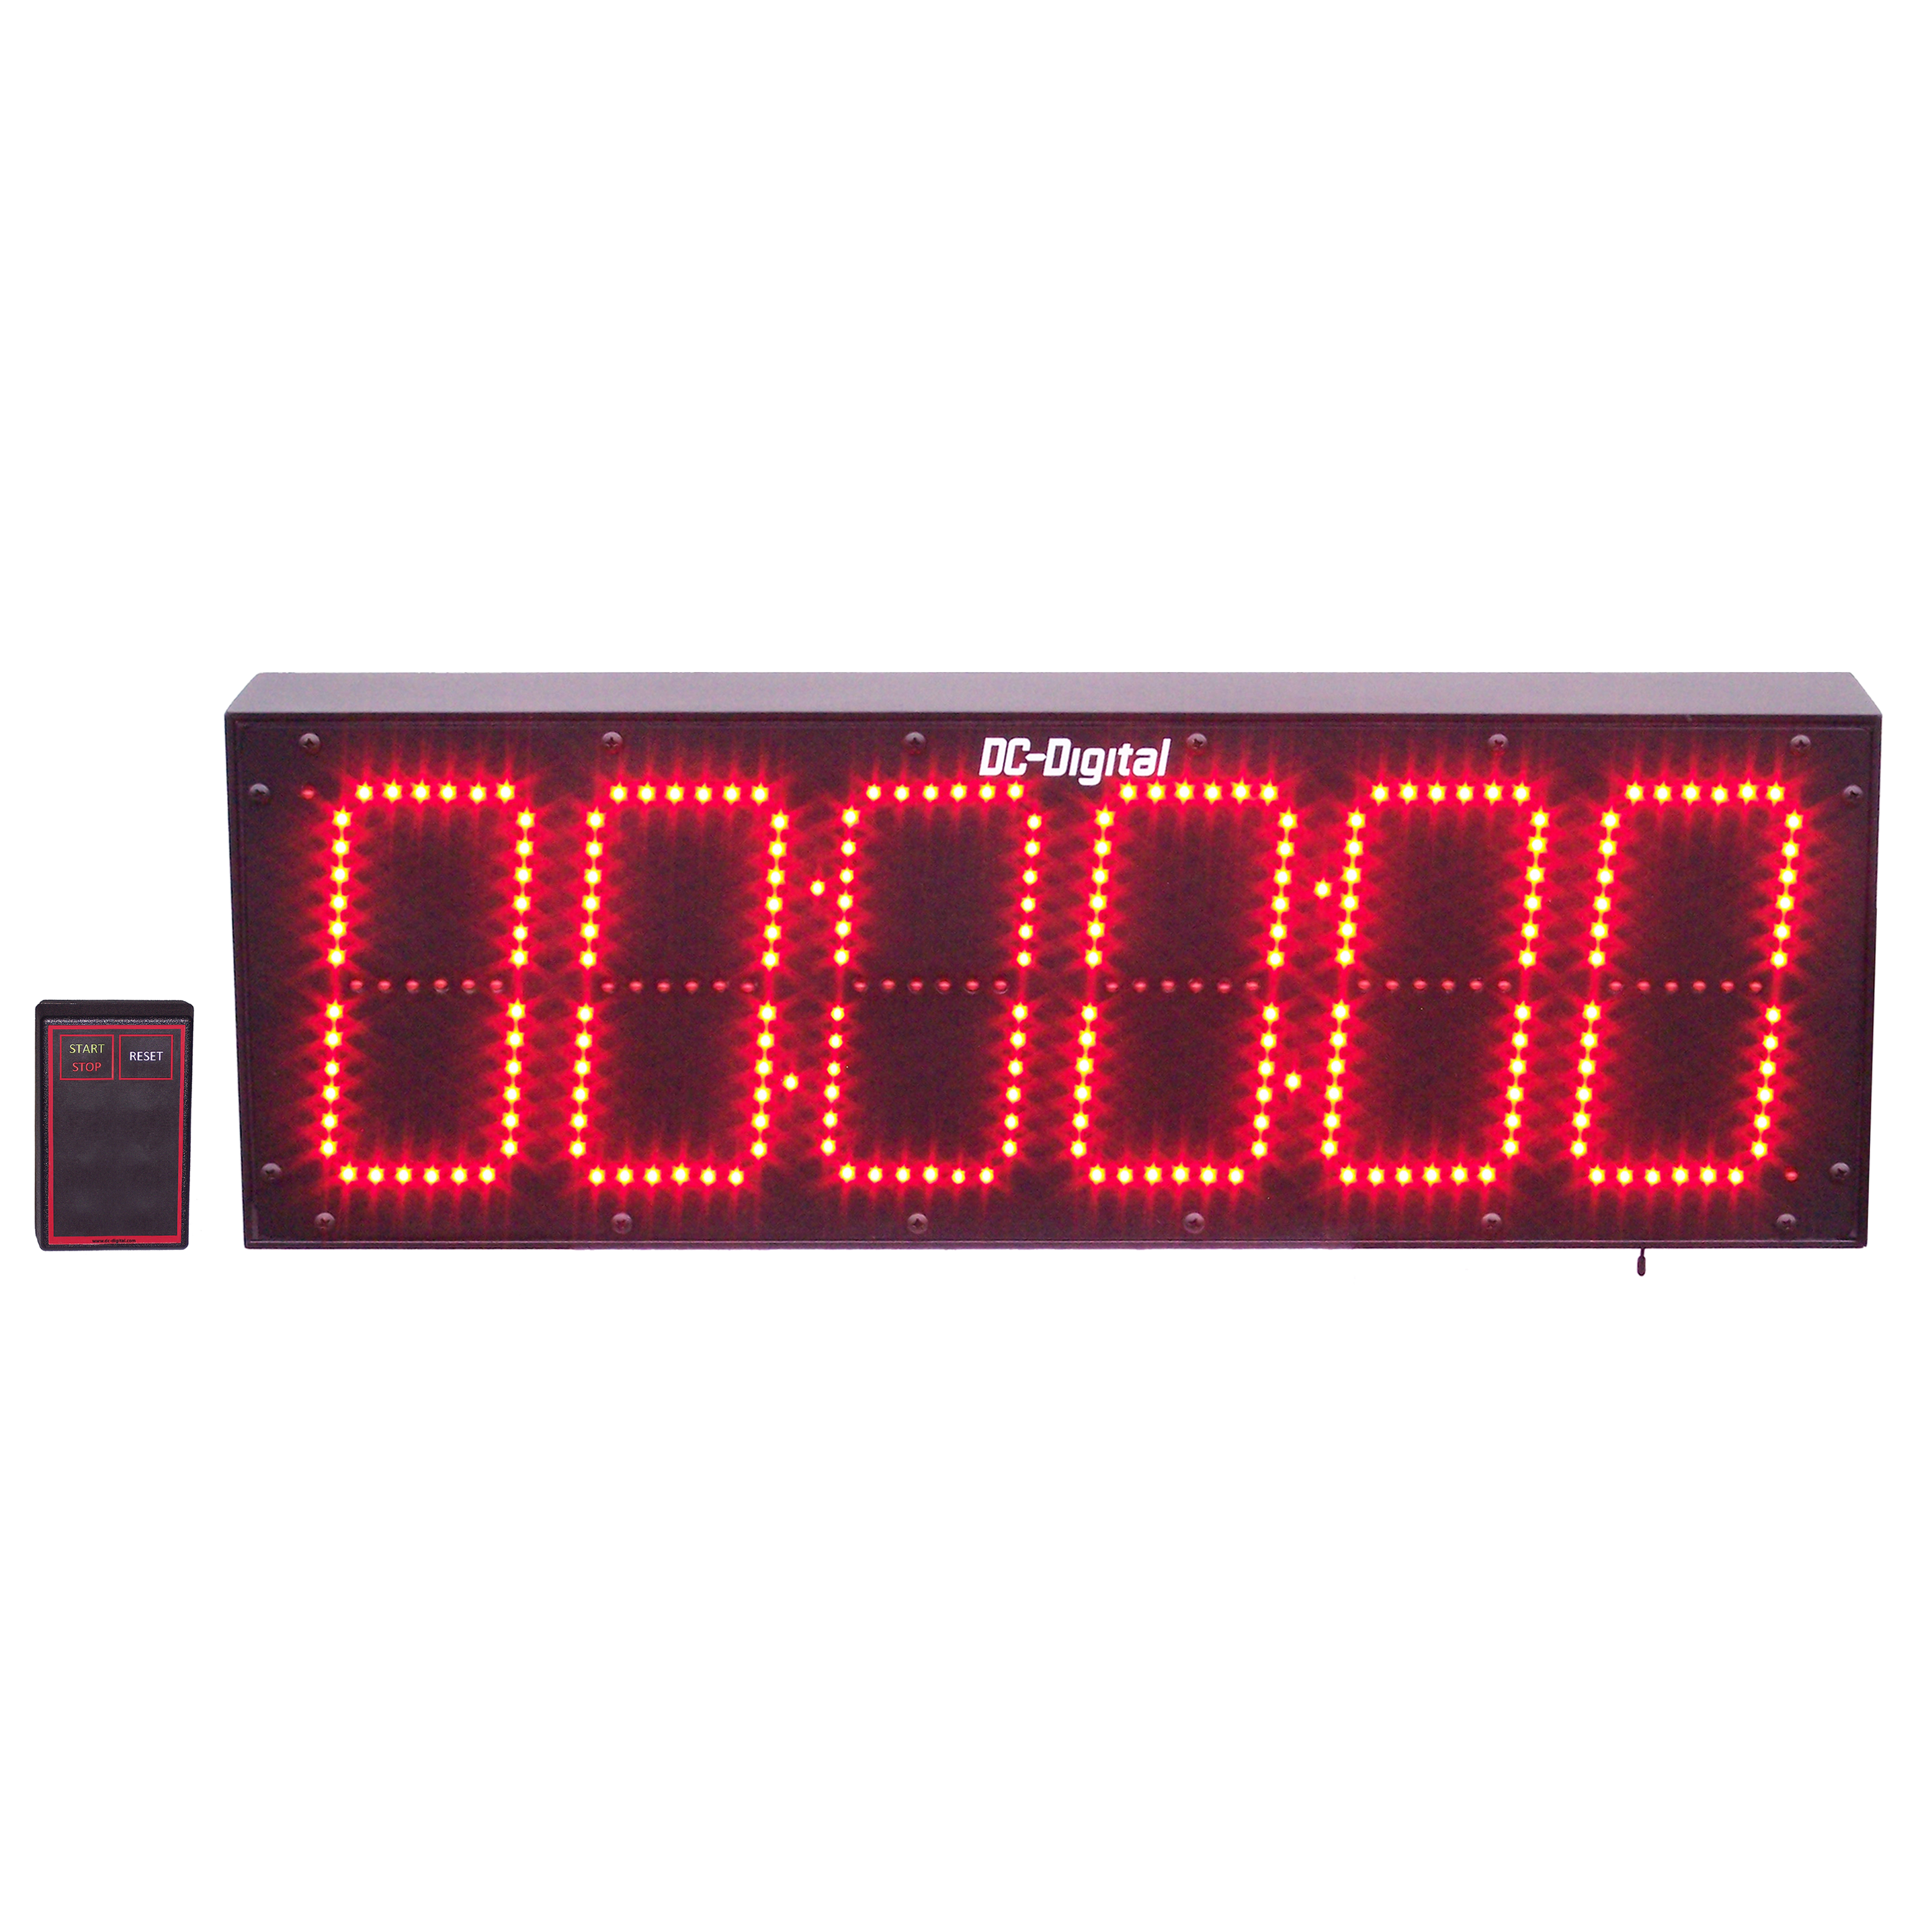 (DC-606T-UP-W) 6.0 Inch LED Digital, RF-Wireless Handheld Controlled, Count Up Timer, Hours, Minutes, Seconds (OUTDOOR)